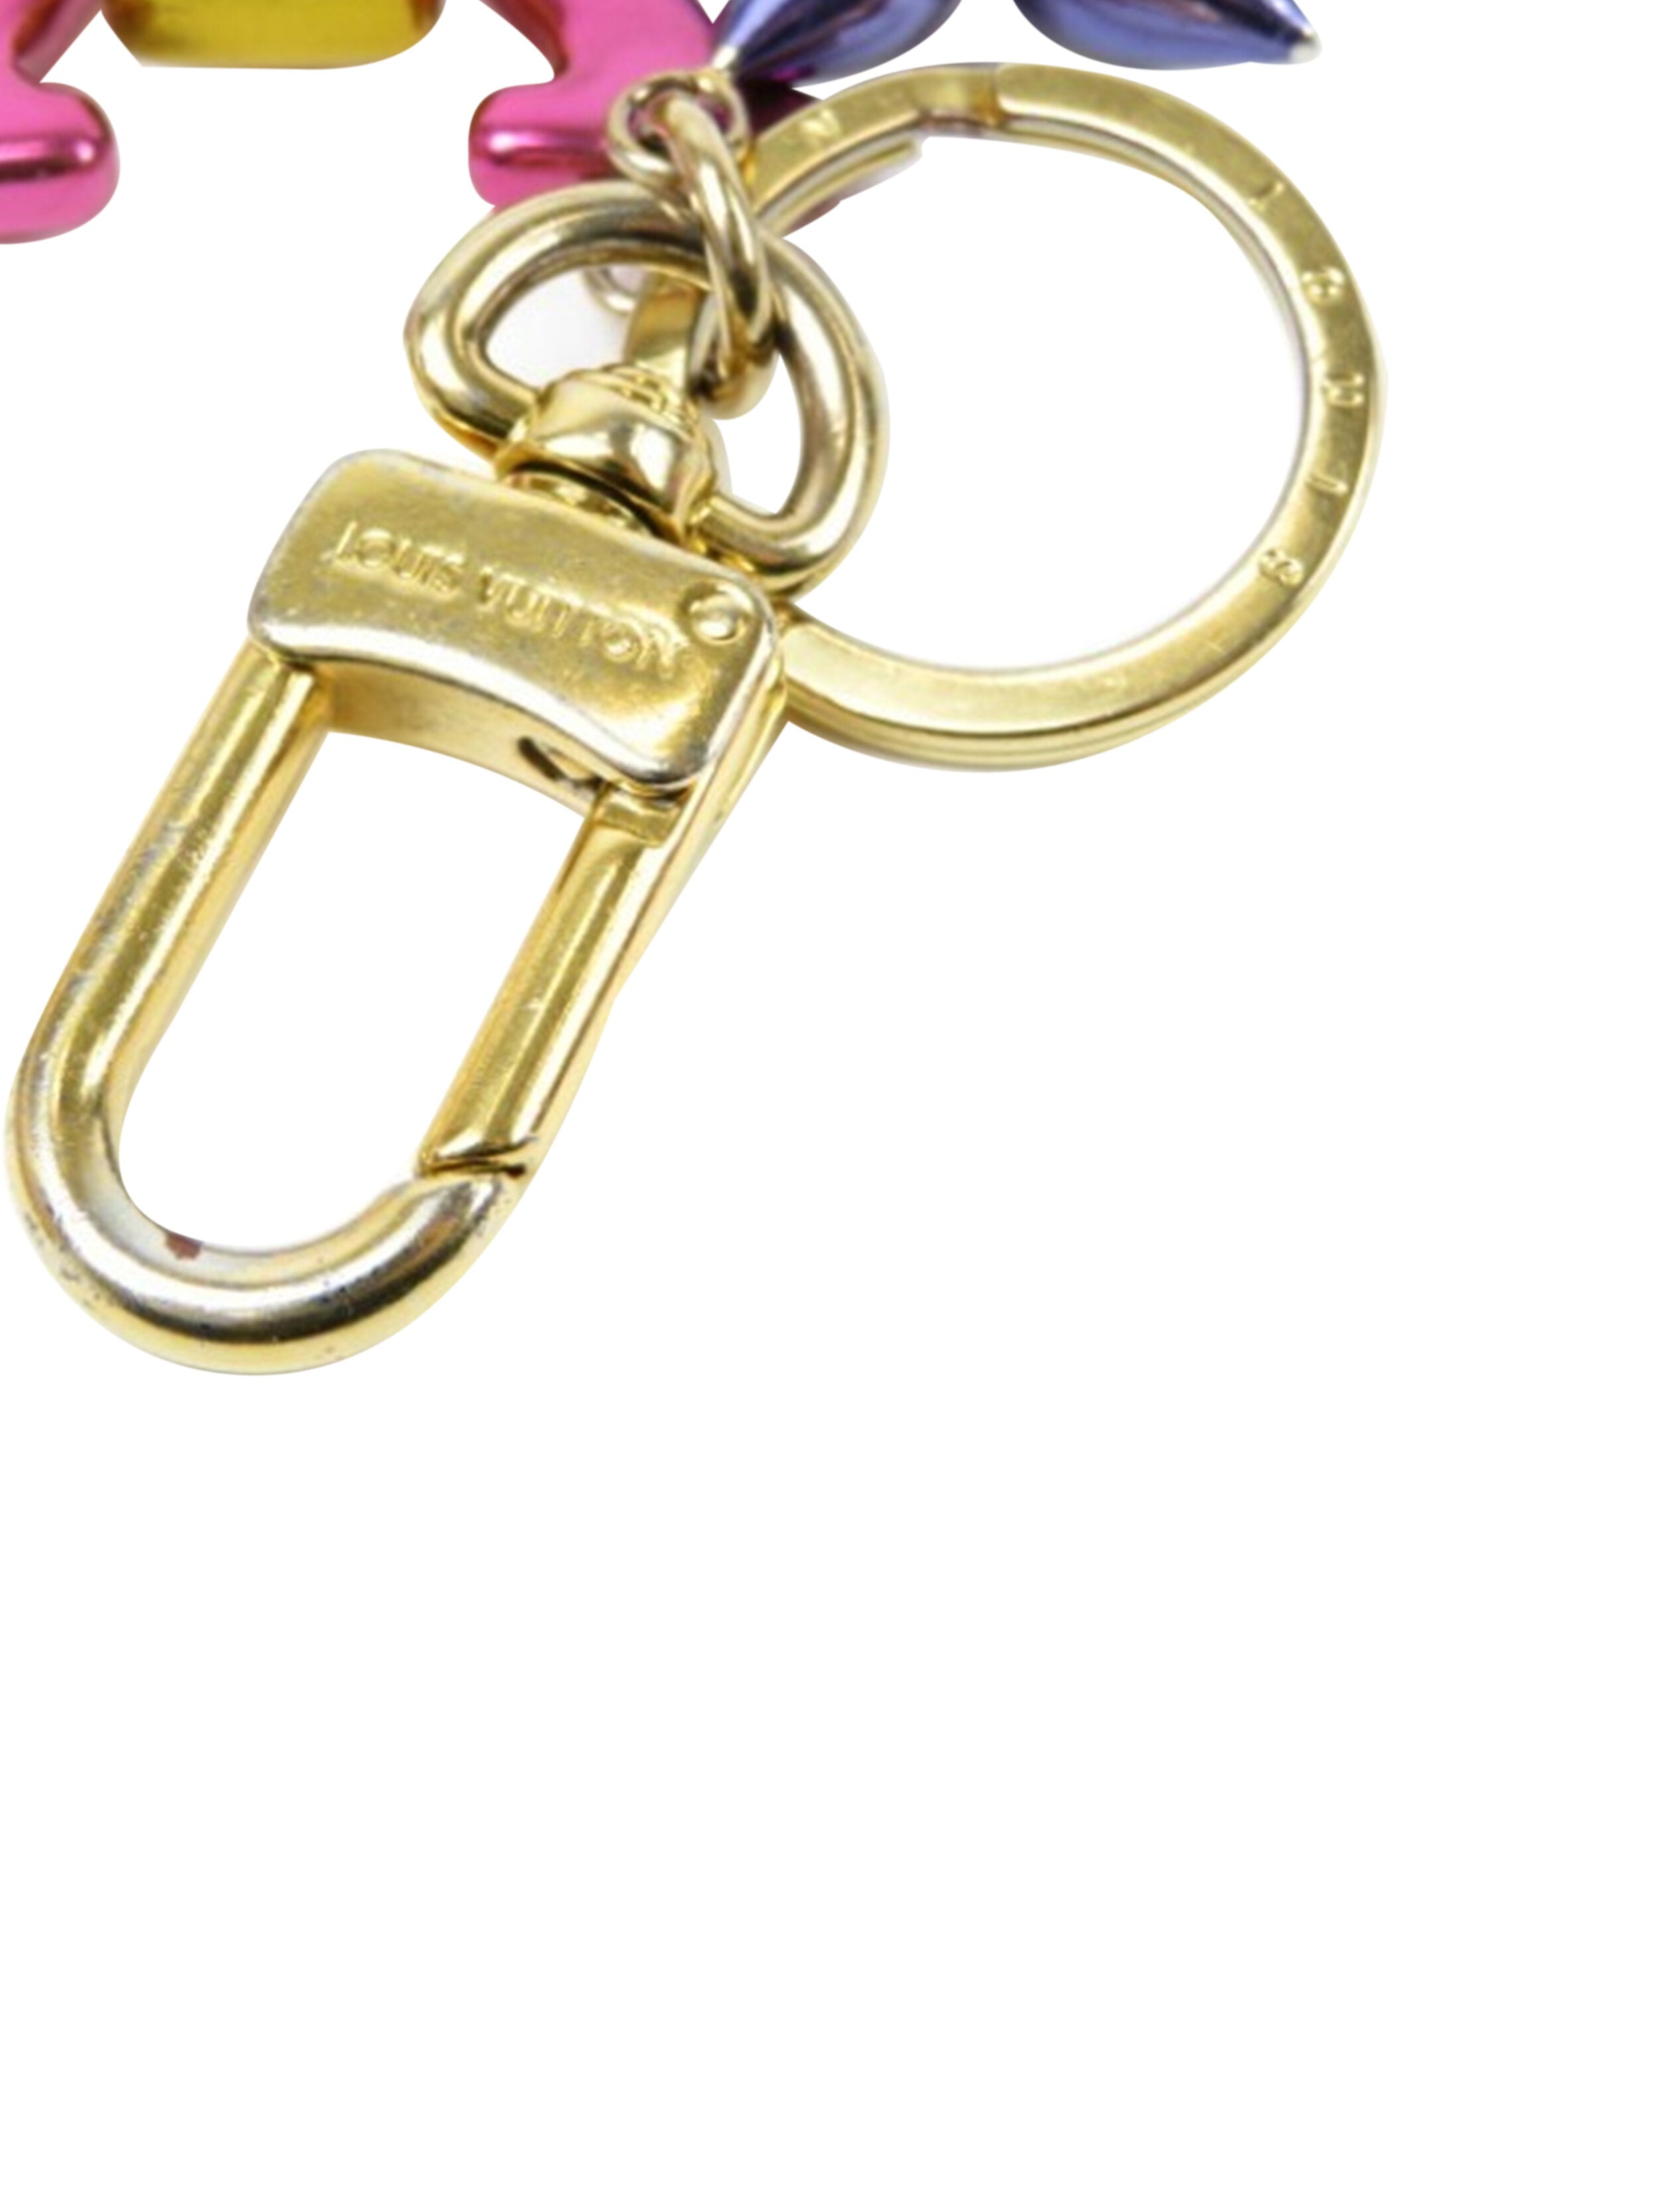 Louis Vuitton Burgundy/Gold Key and Lock Key Holder and Bag Charm